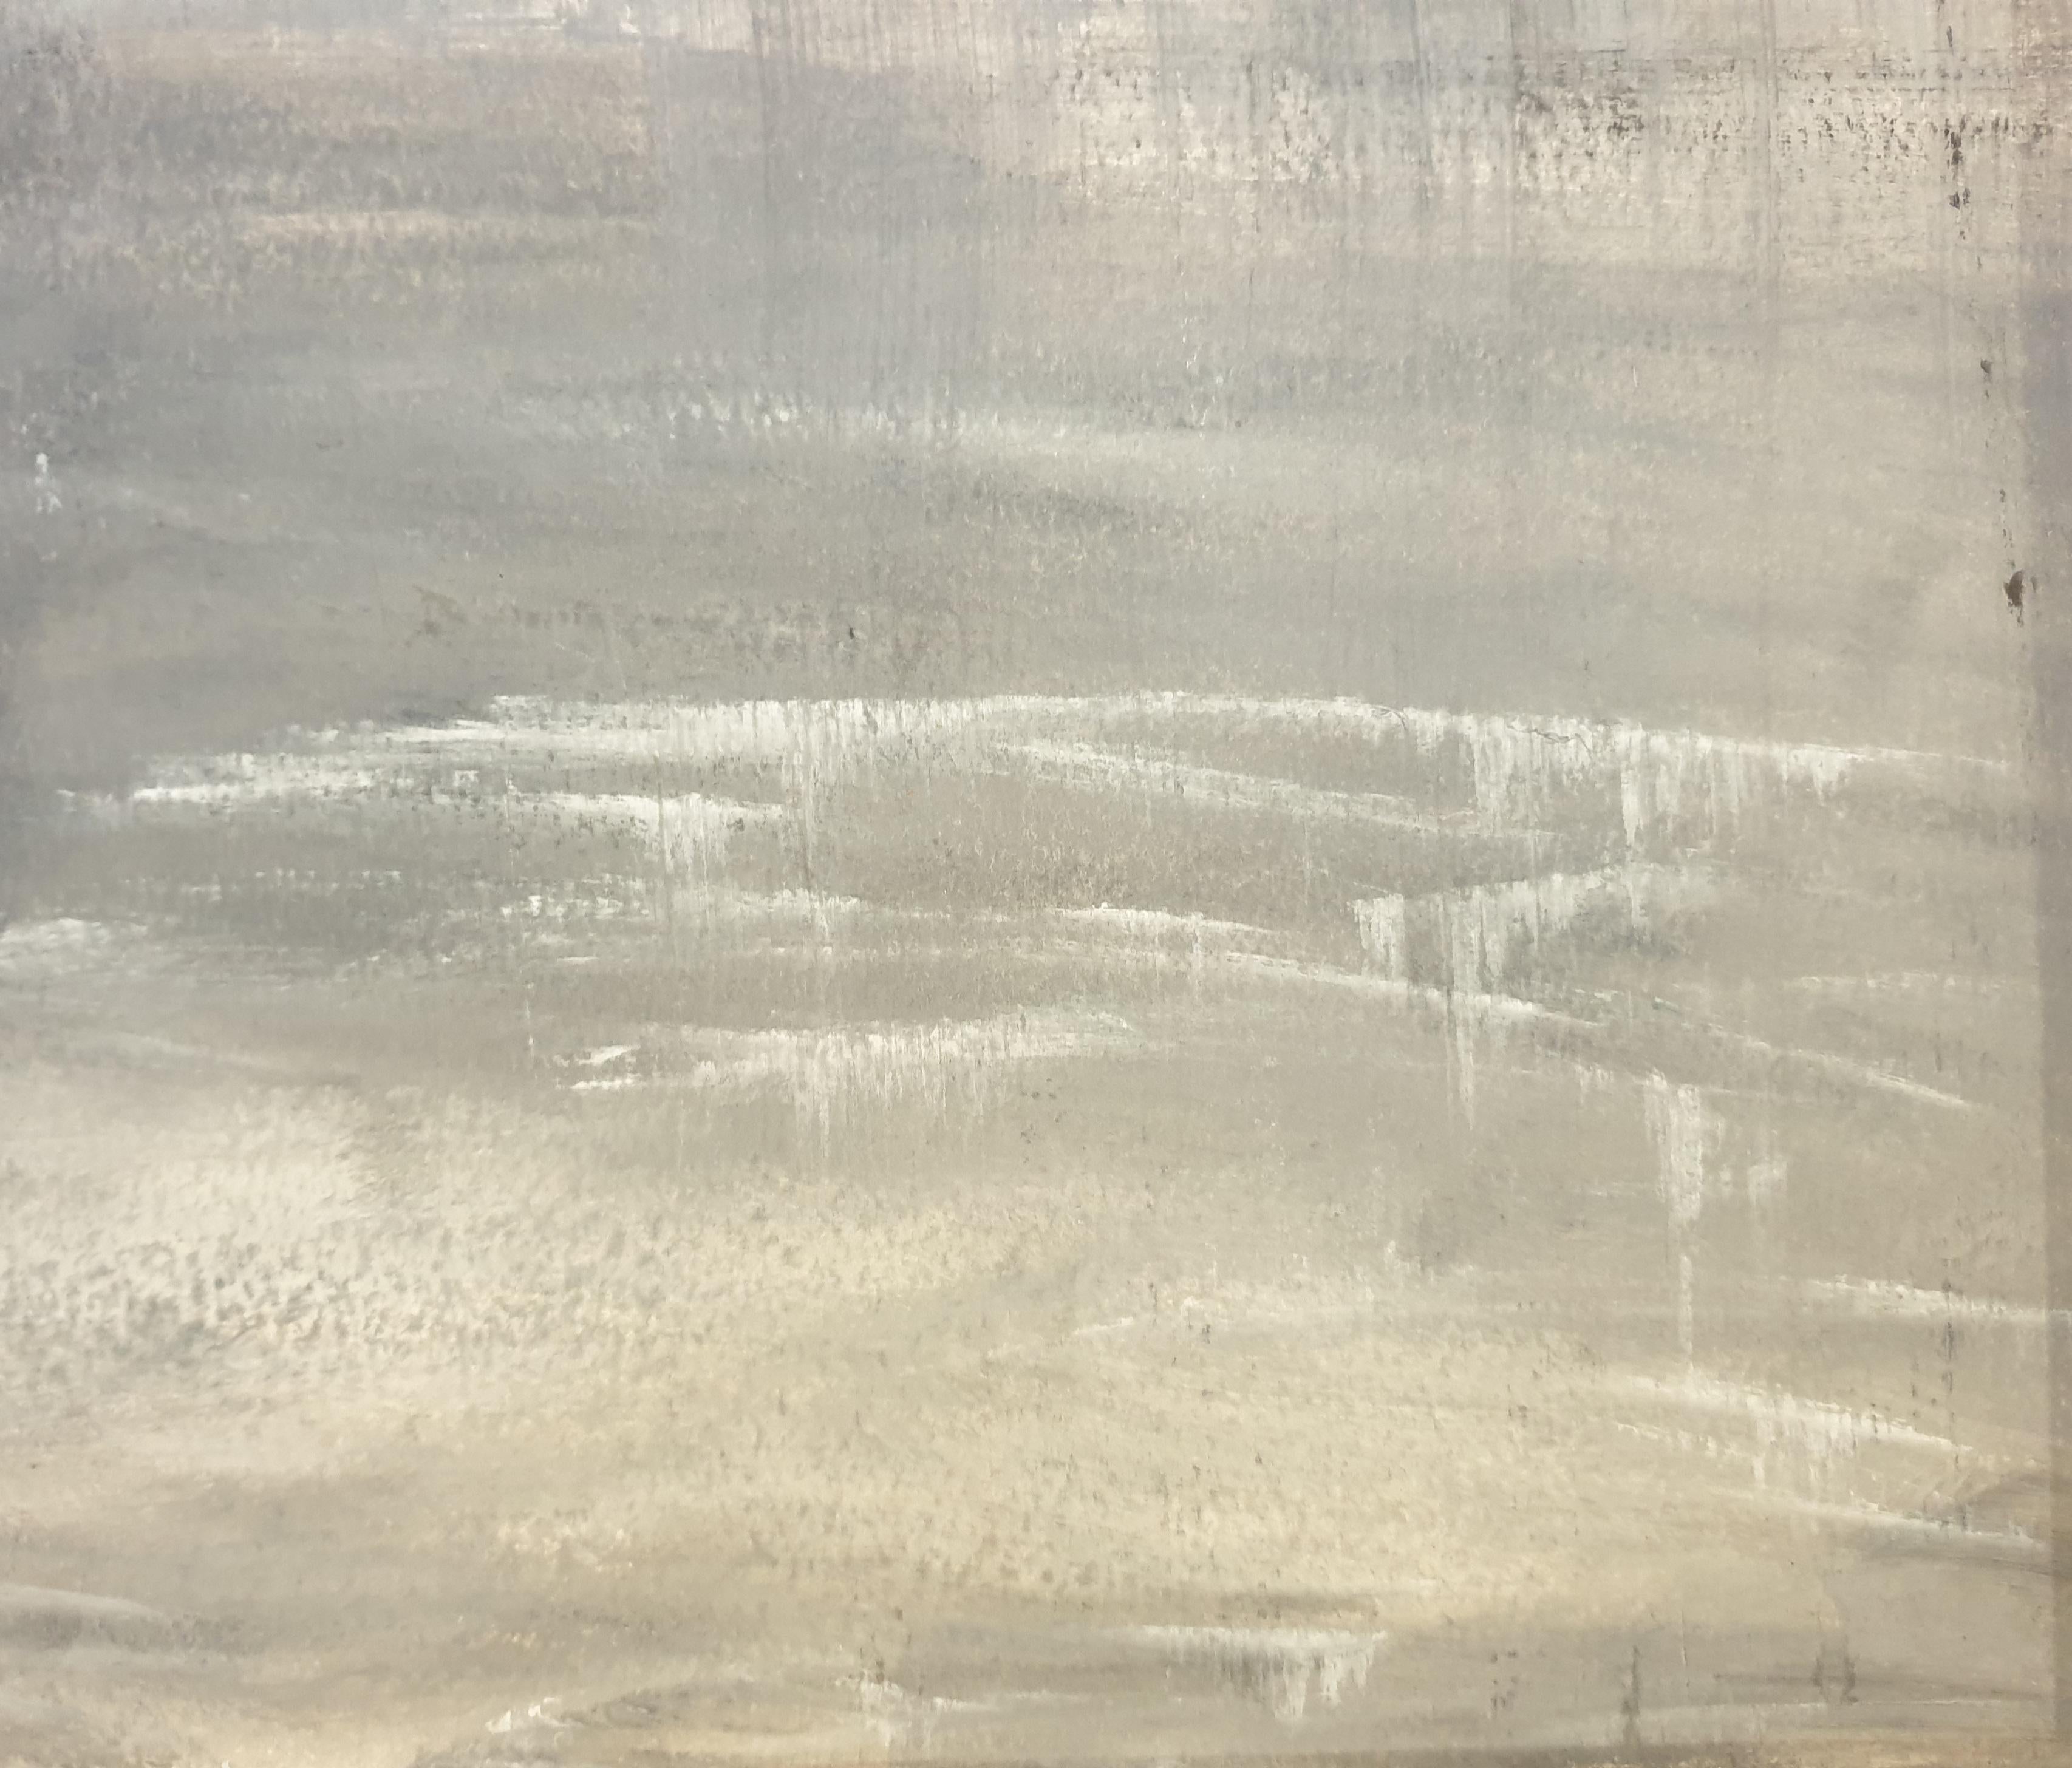 'Première Abstraction'. French Colour Field Acrylic on Paper - Gray Abstract Painting by N Simonet